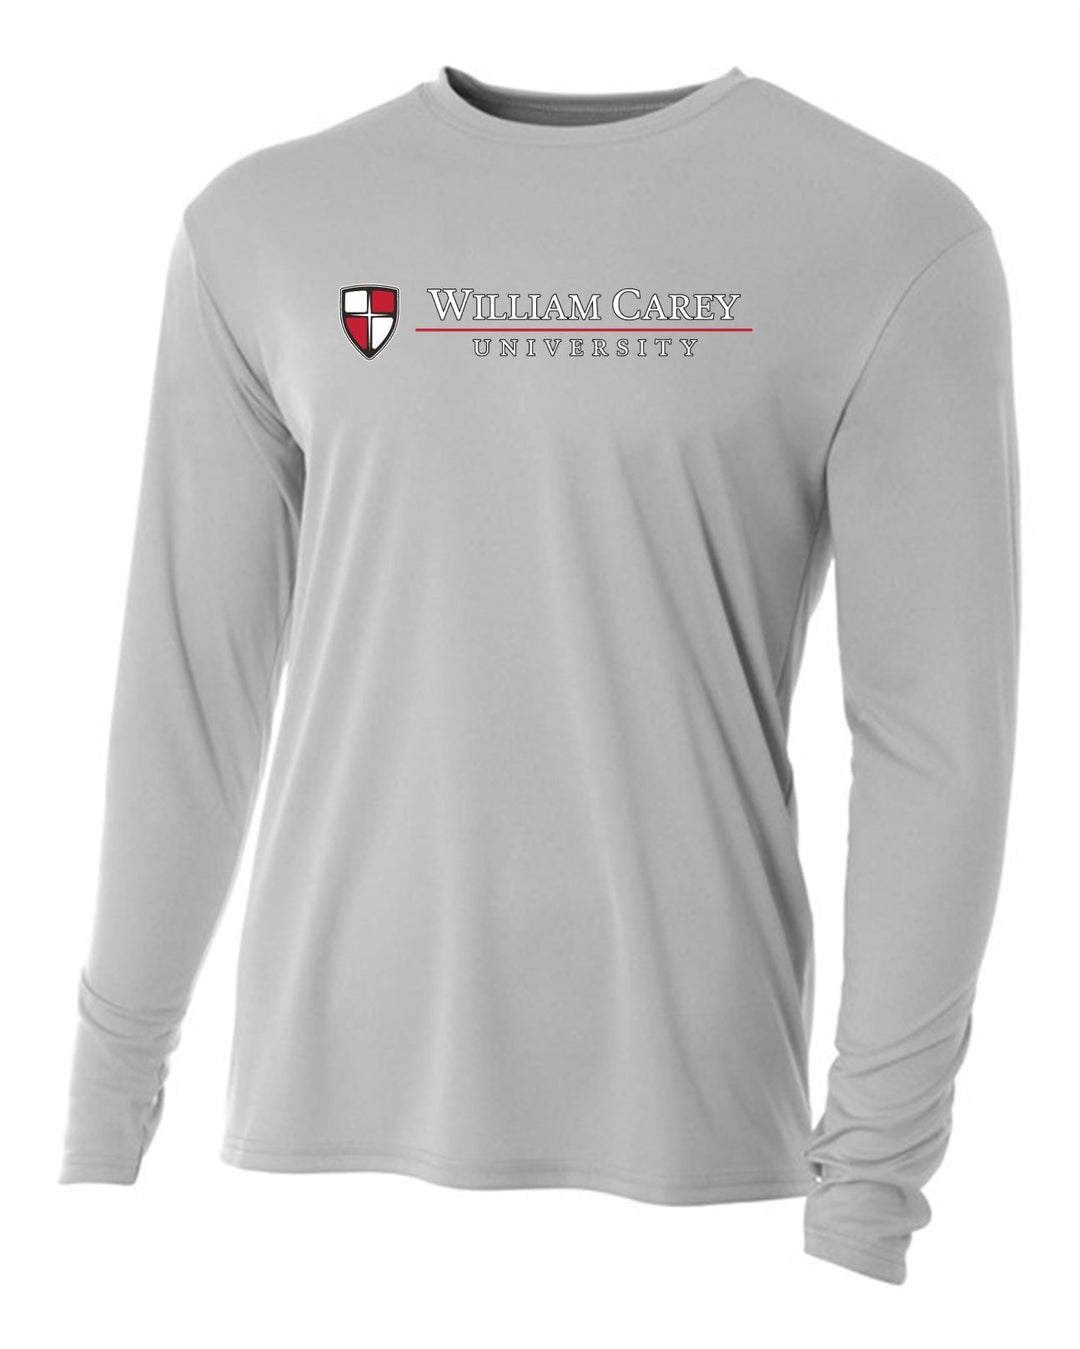 WCU College Of Health Sciences Youth Long-Sleeve Performance Shirt WCU Health Sciences Silver Grey Youth Small - Third Coast Soccer